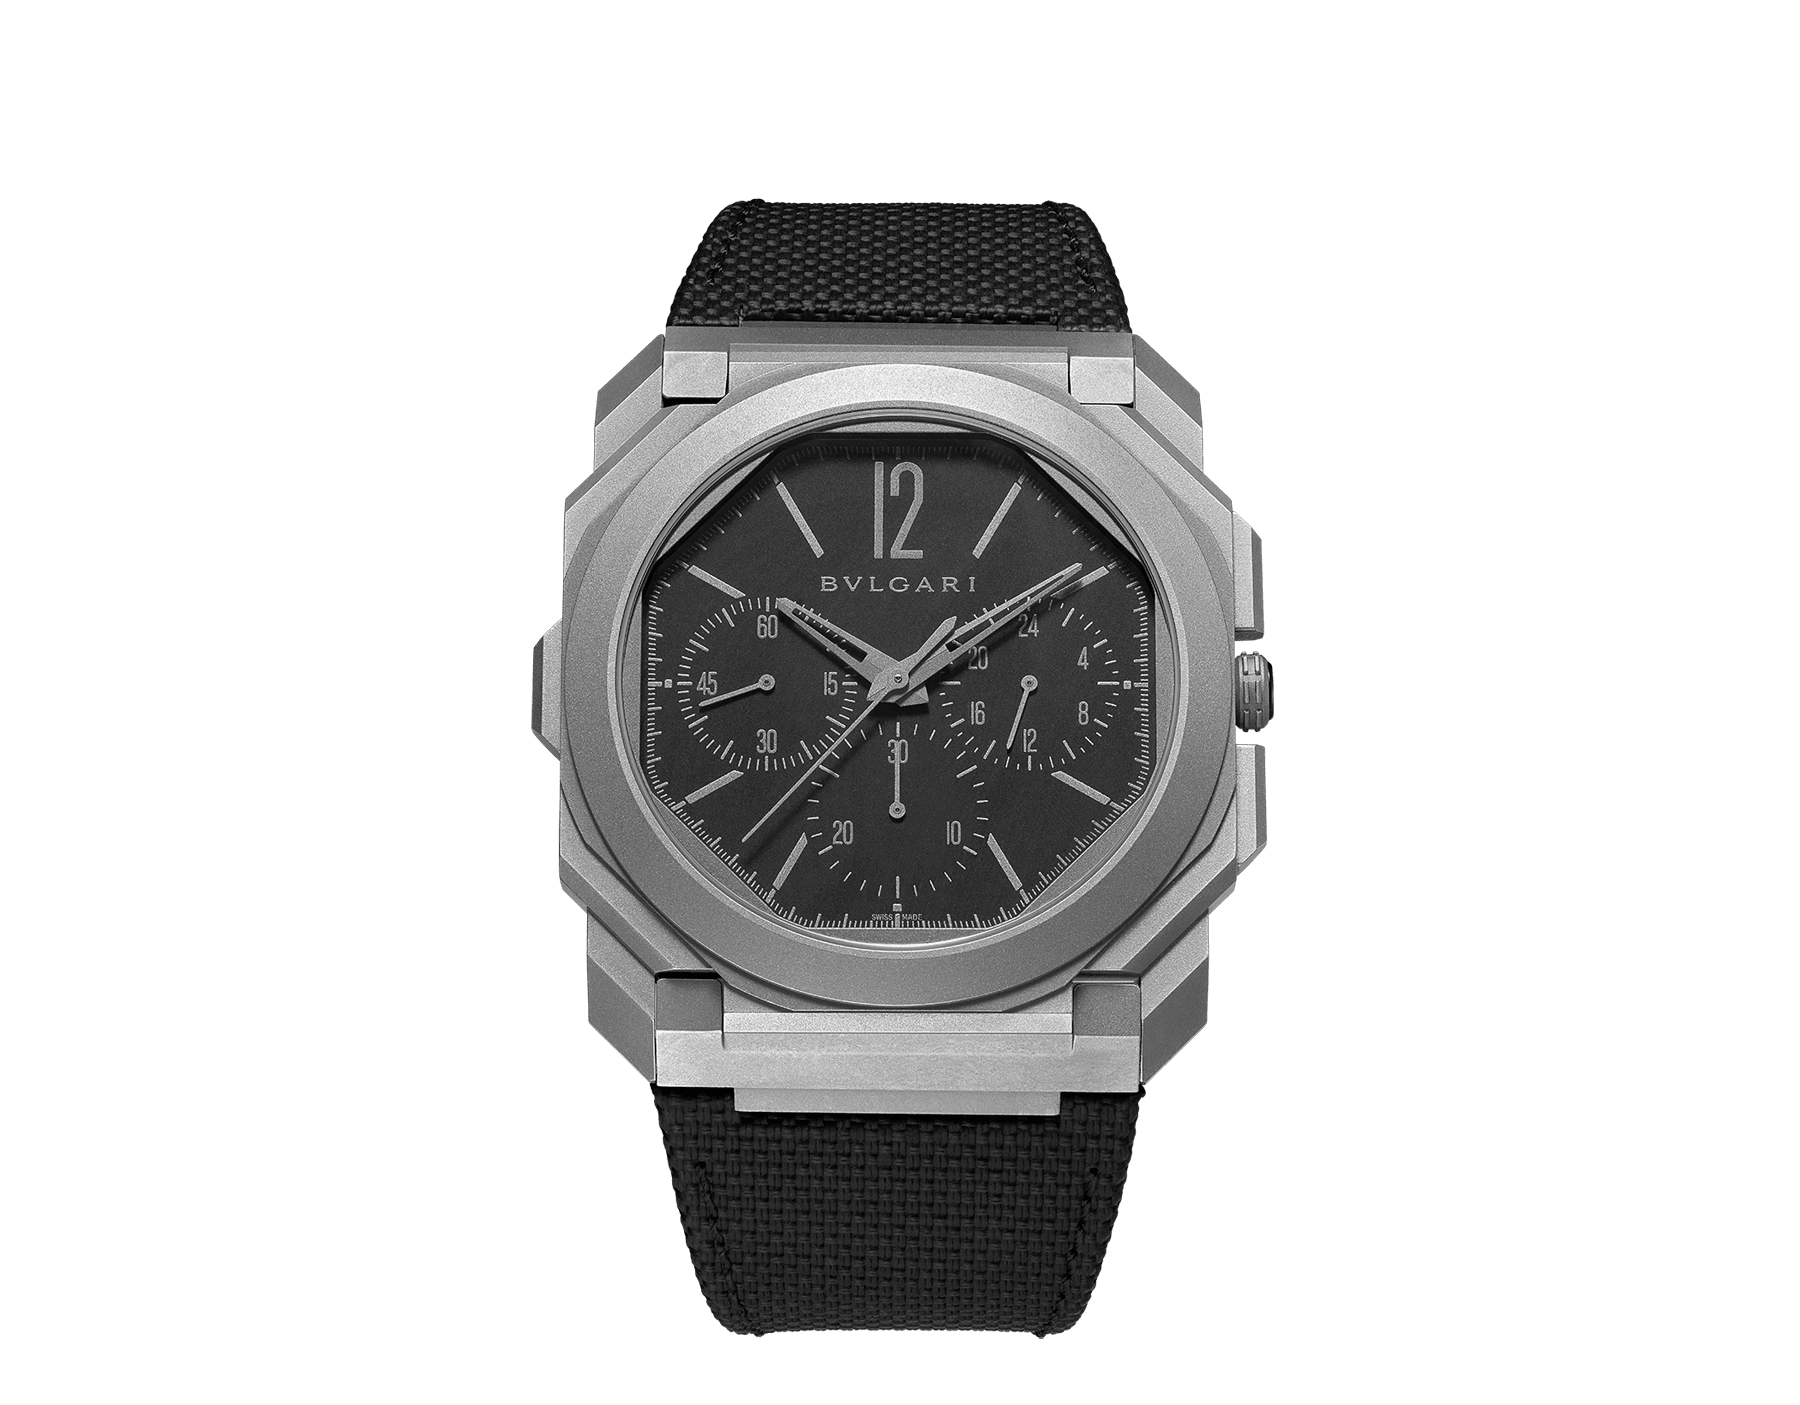 Octo Finissimo Chrono GMT watch with extra-thin mechanical manufacture chronograph and GMT movement, automatic winding with platinum peripheral rotor, titanium case, transparent case back, black dial and black rubber bracelet. Water-resistant up to 30 meters 103371 image 1